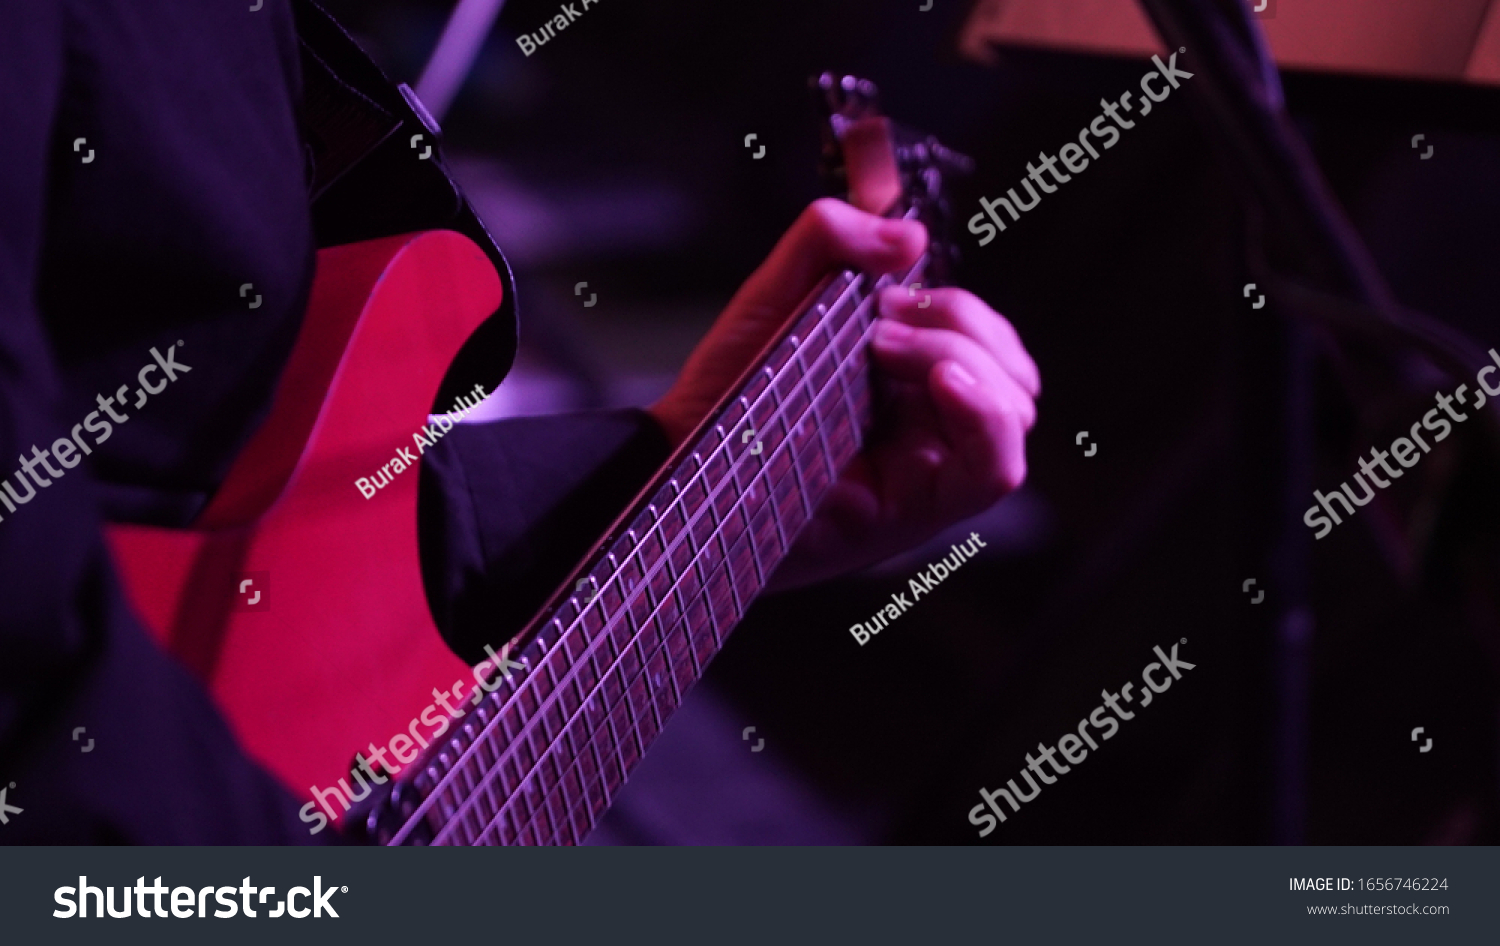 Man playing music with an electro guitar in the concert. Photography of the musician plays the electro guitar. He picks the strings, clamps the strings on the fretboard. High resolution image. #1656746224